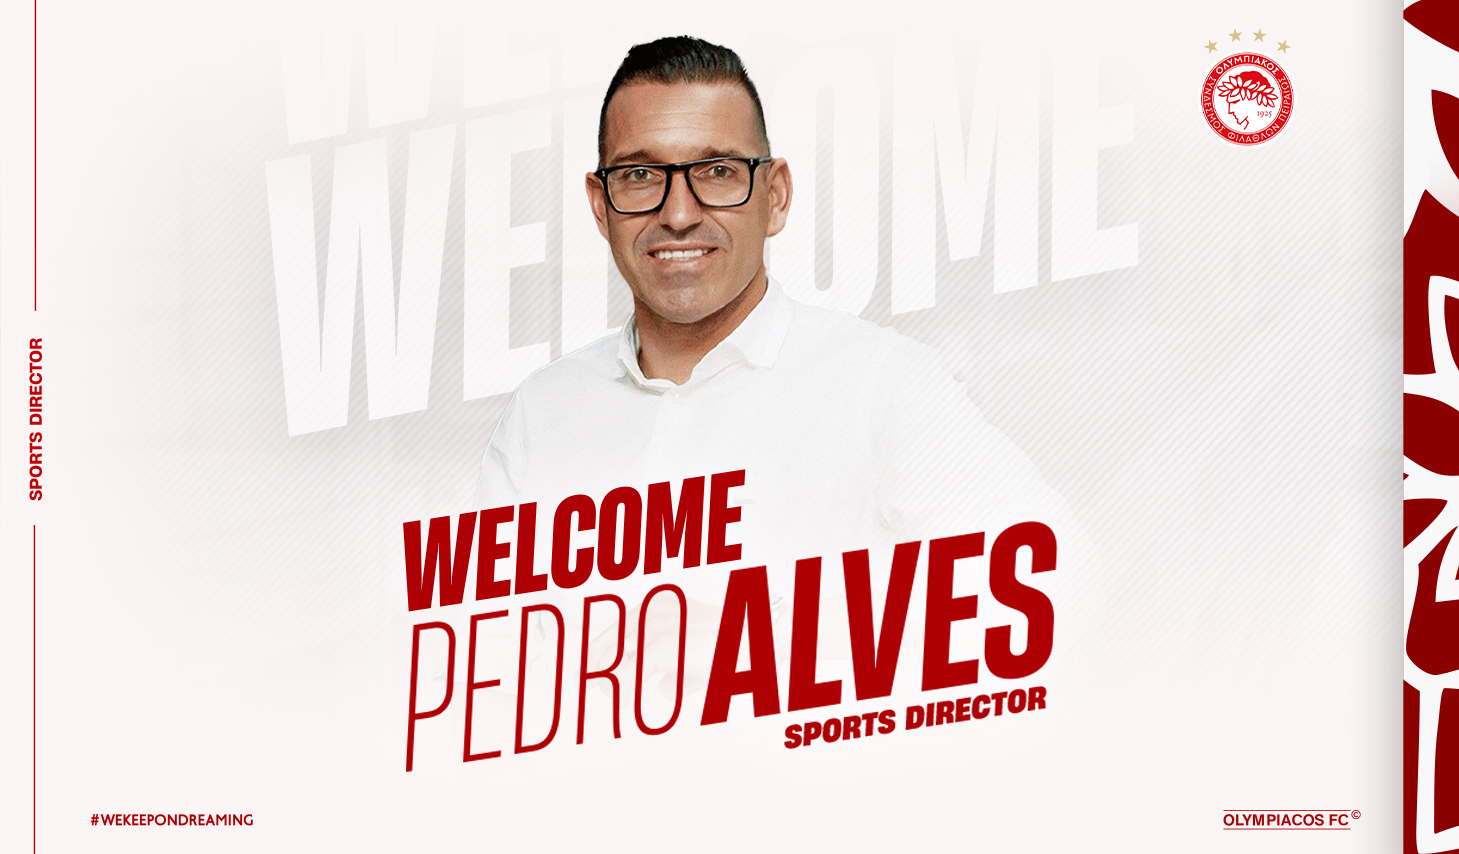 Pedro Alves joins Olympiacos